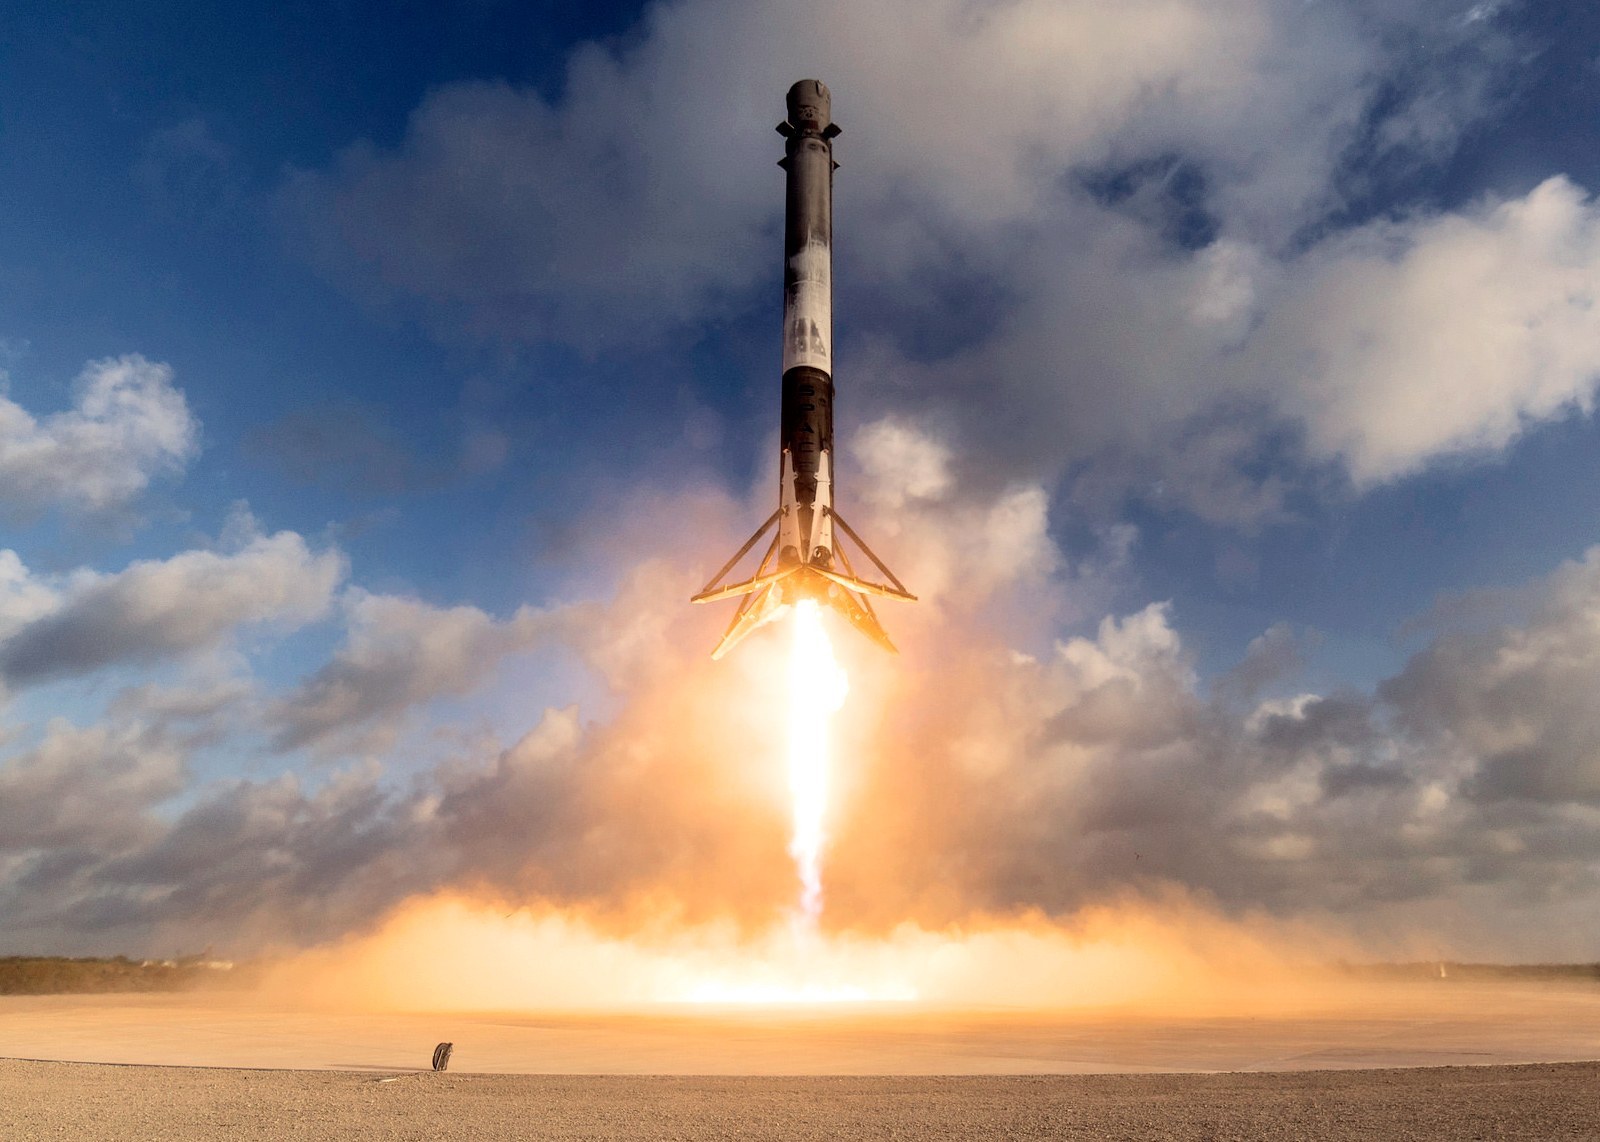 No American Has Got Perfect Score on This Quiz Without Cheating spacex